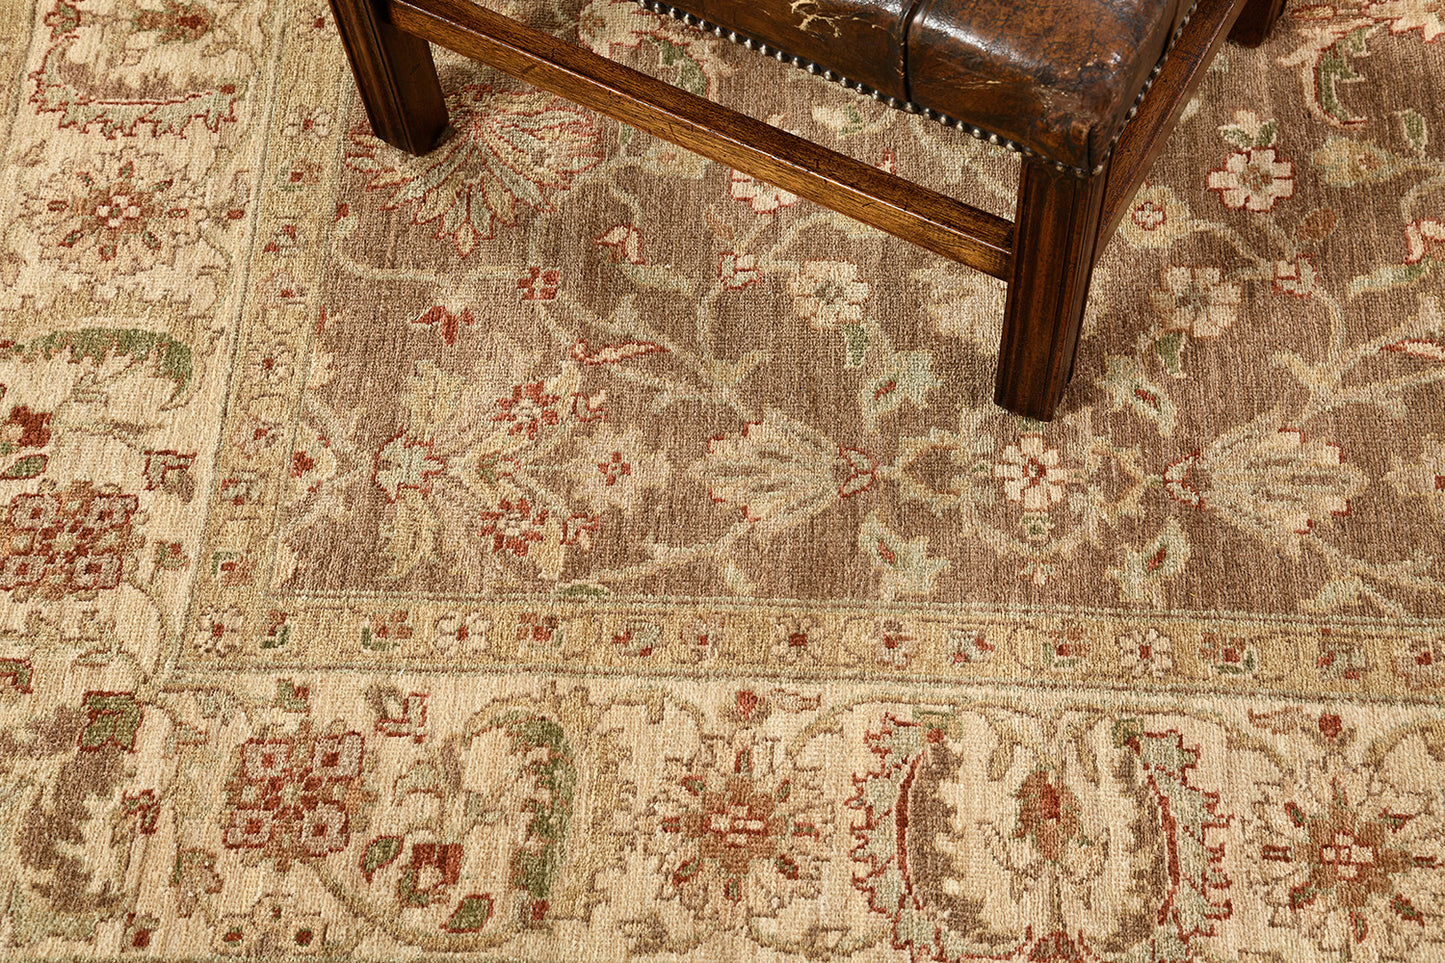 Natural Dye Sultanabad Revival Square Rug